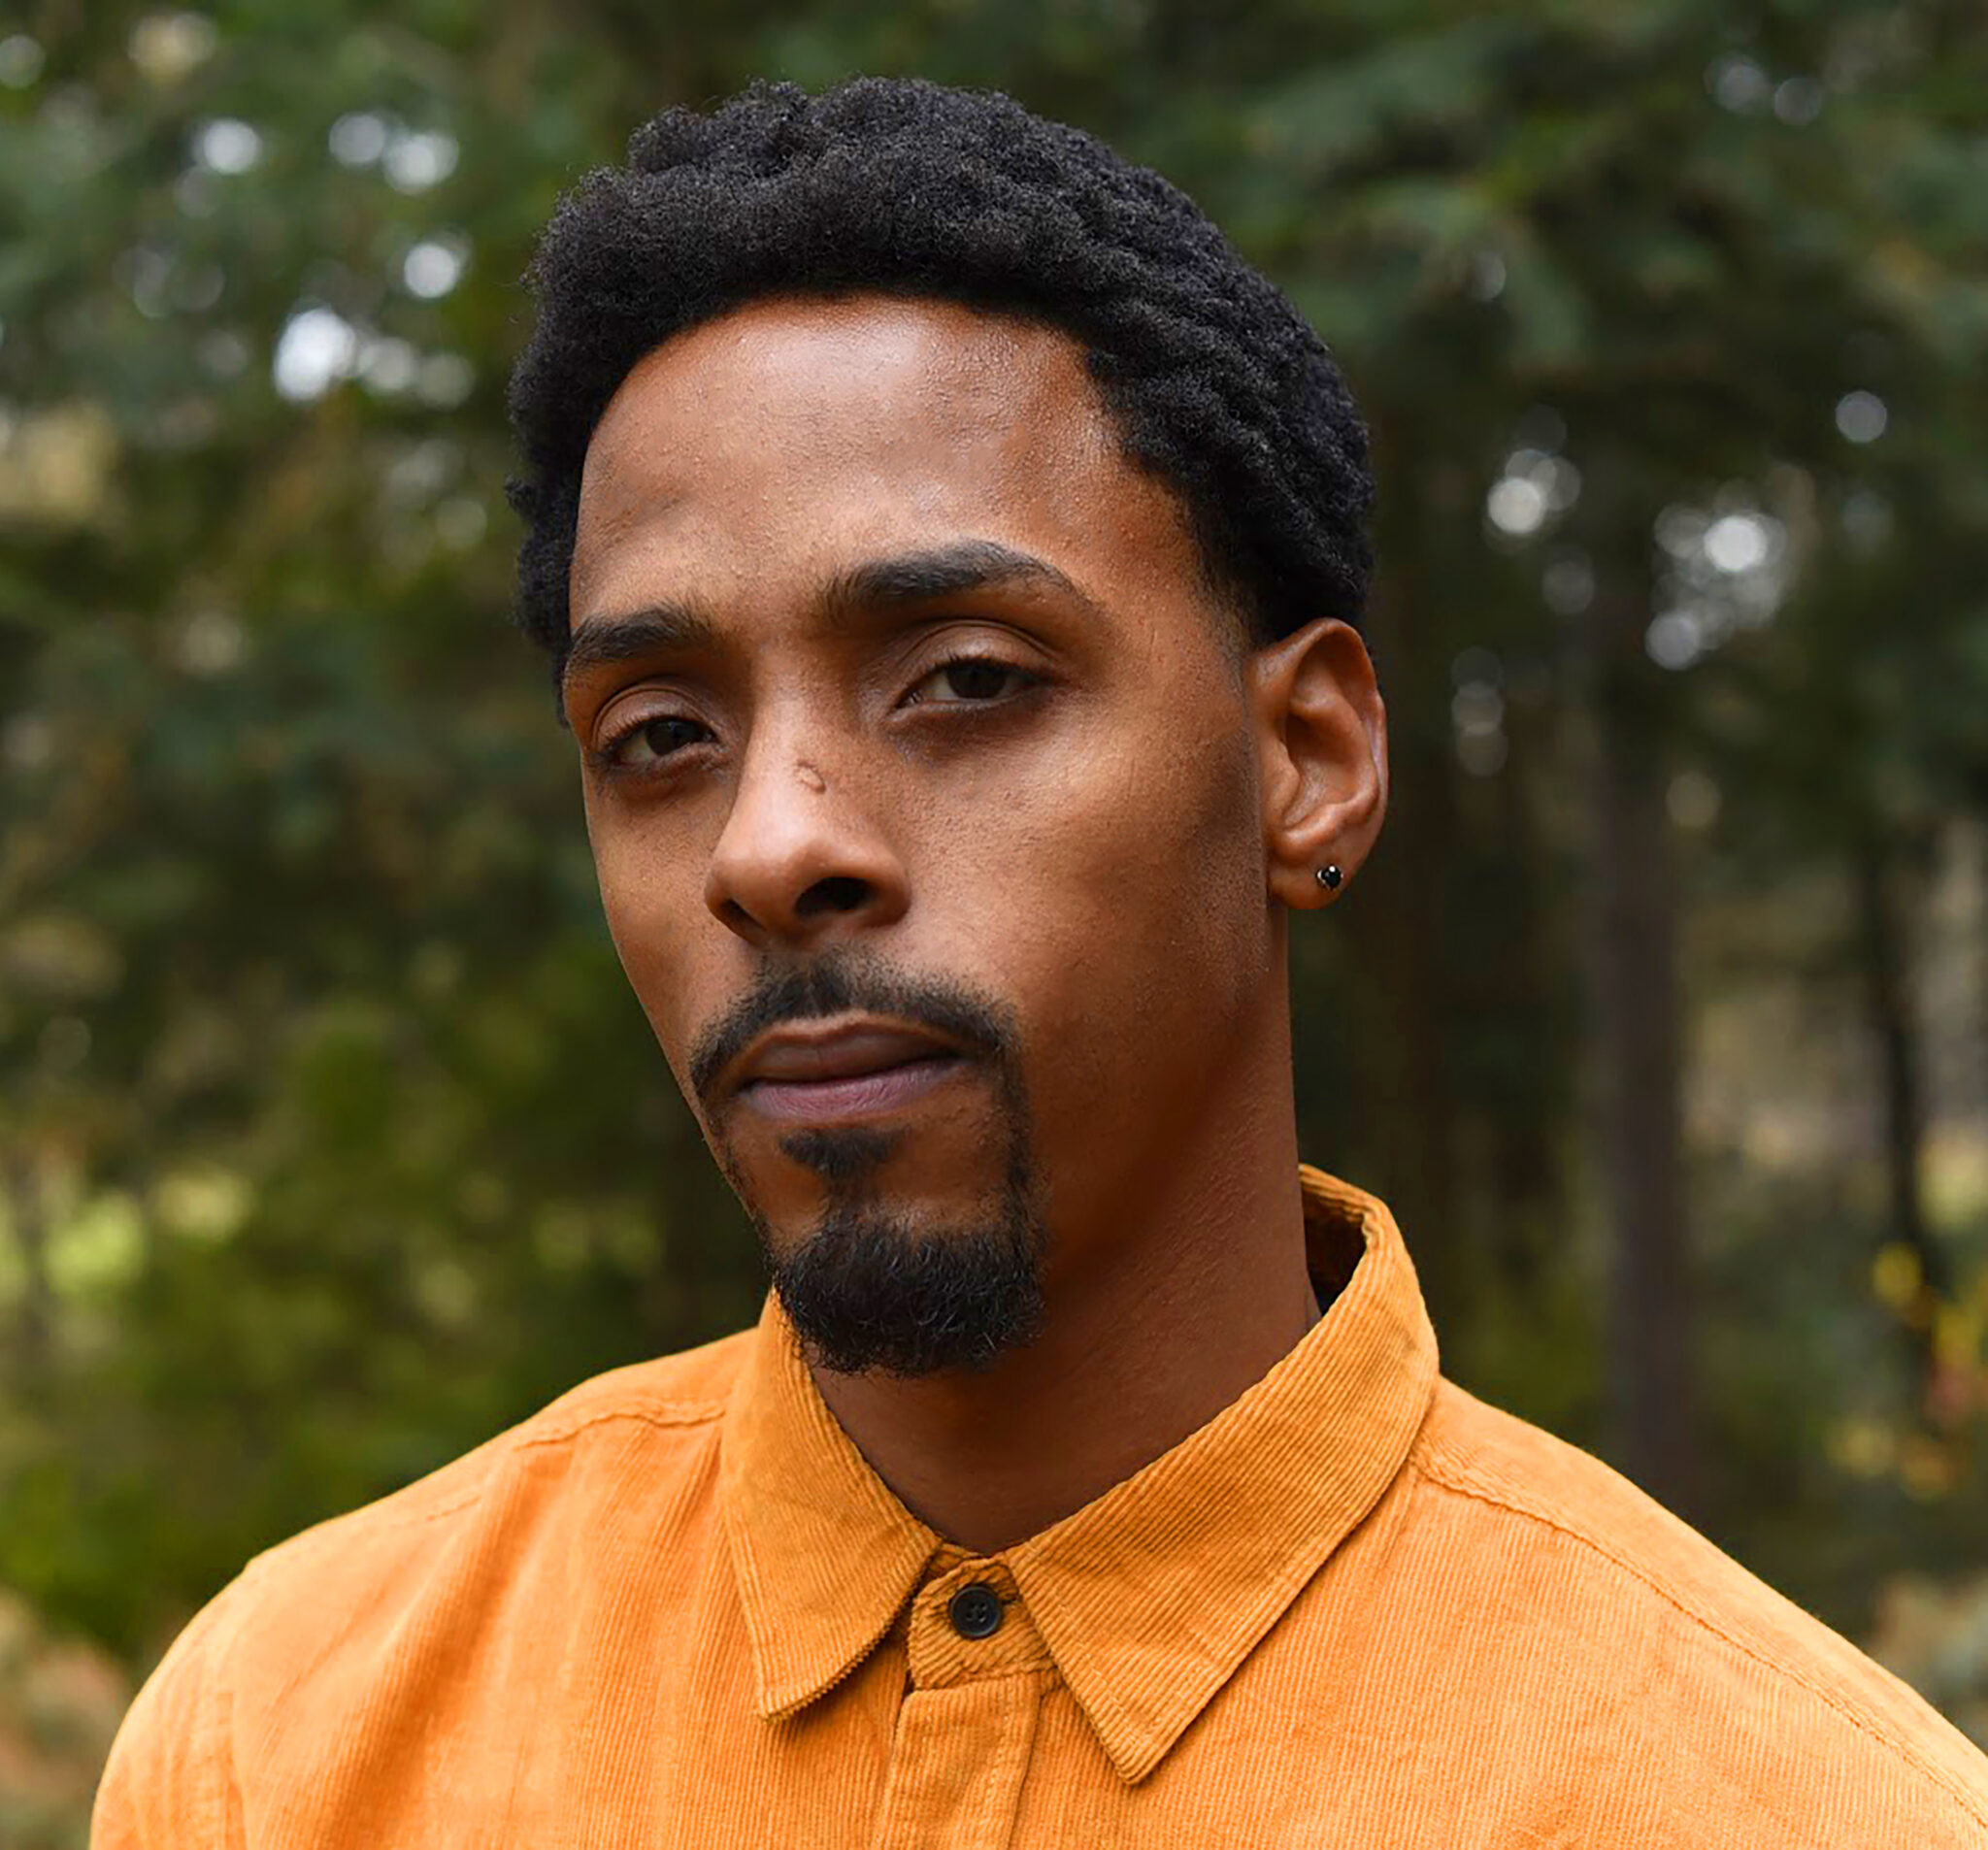 person with short dark hair and facial hair wears an orange shirt and poses for a headshot